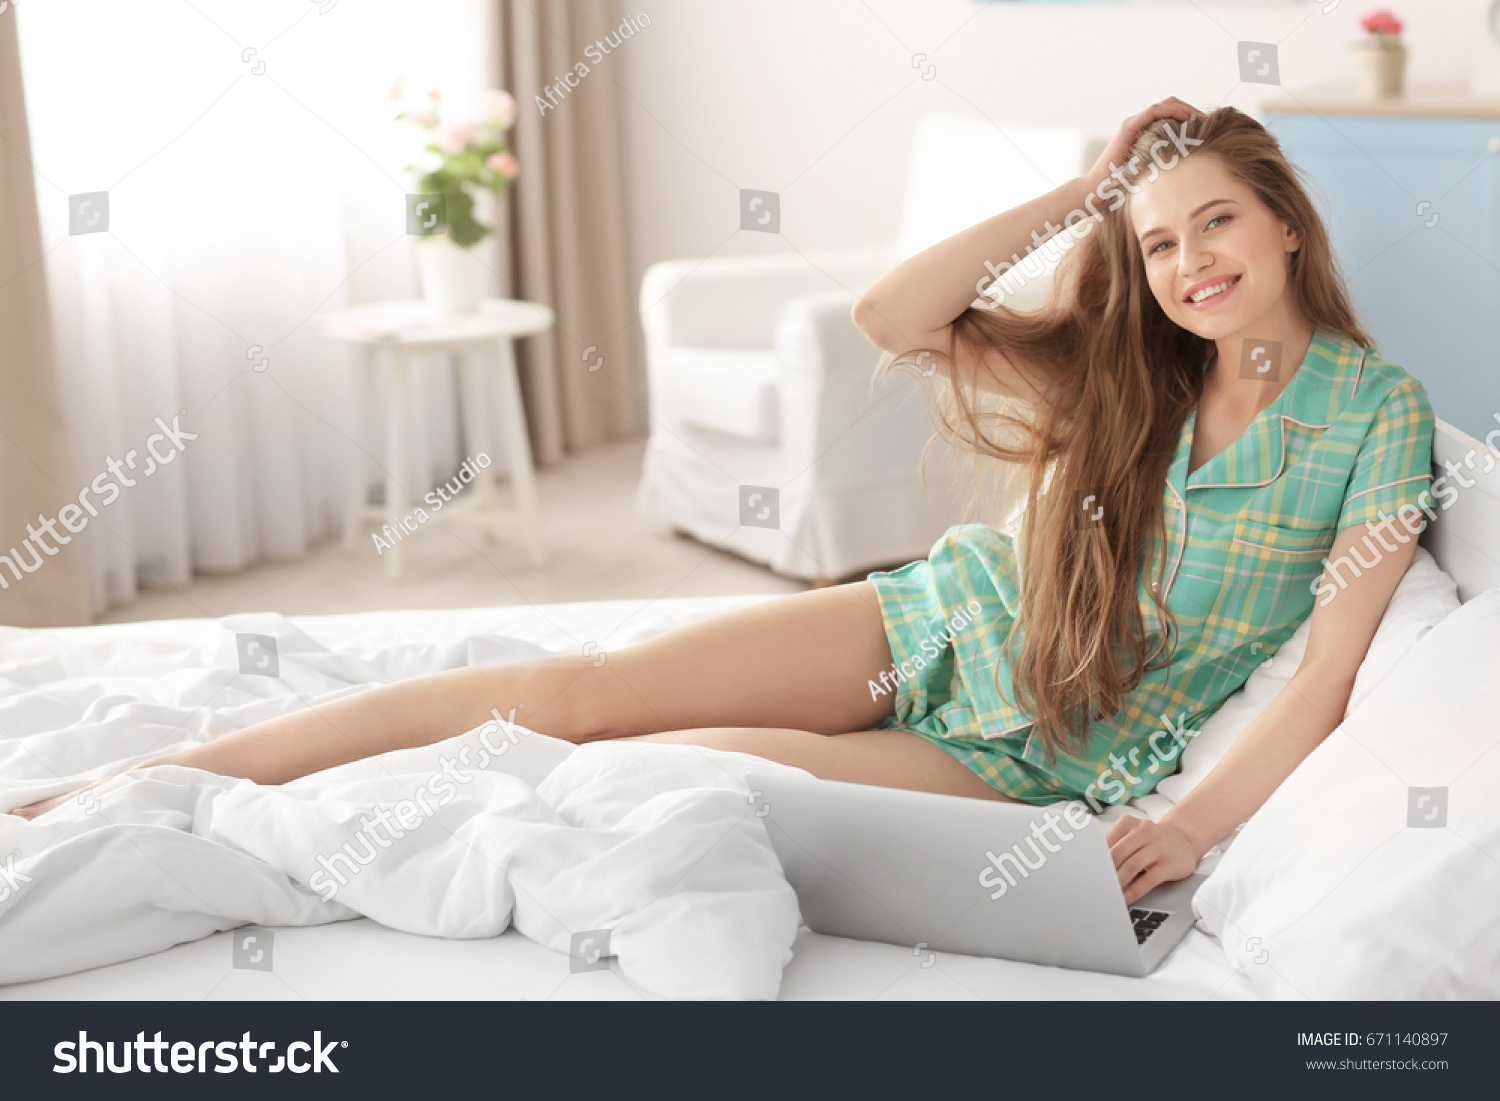 Morning of beautiful young woman sitting on bed with laptop #671140897